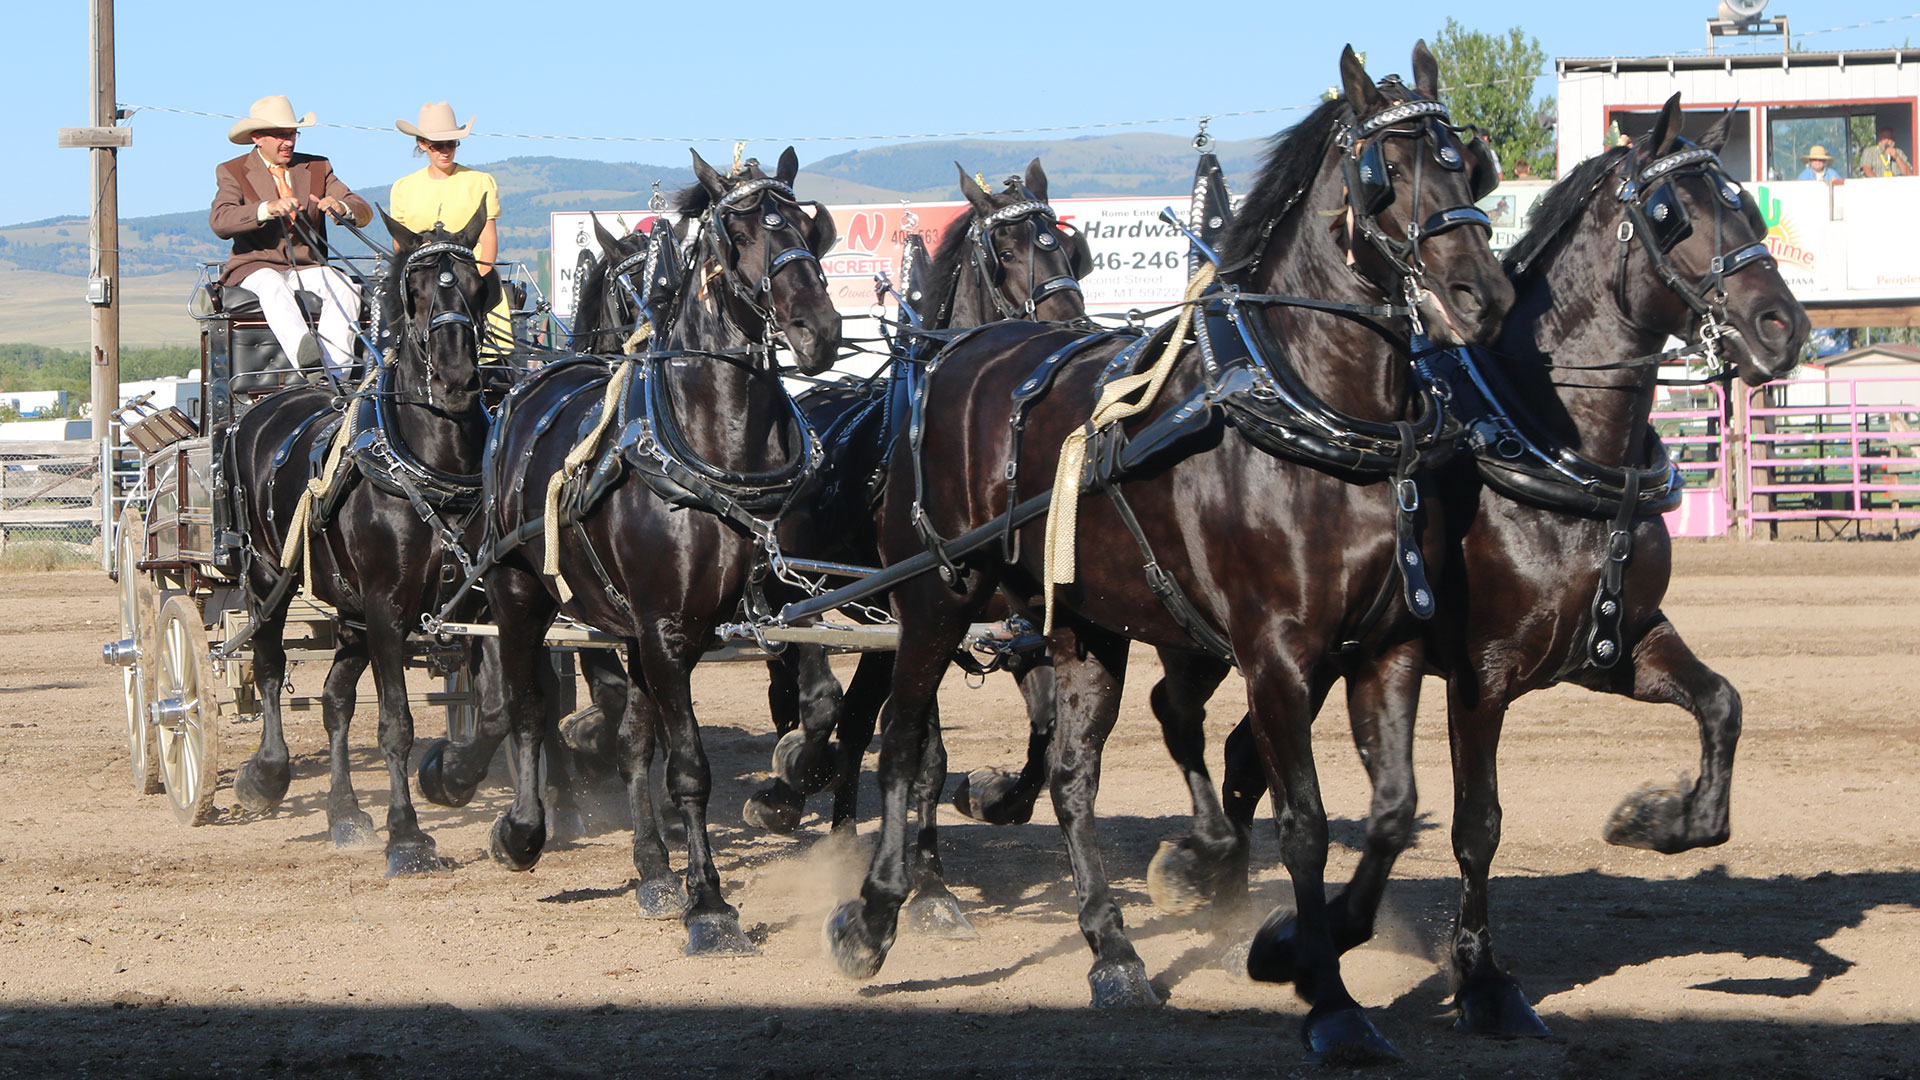 About The Big Sky Draft Horse Expo